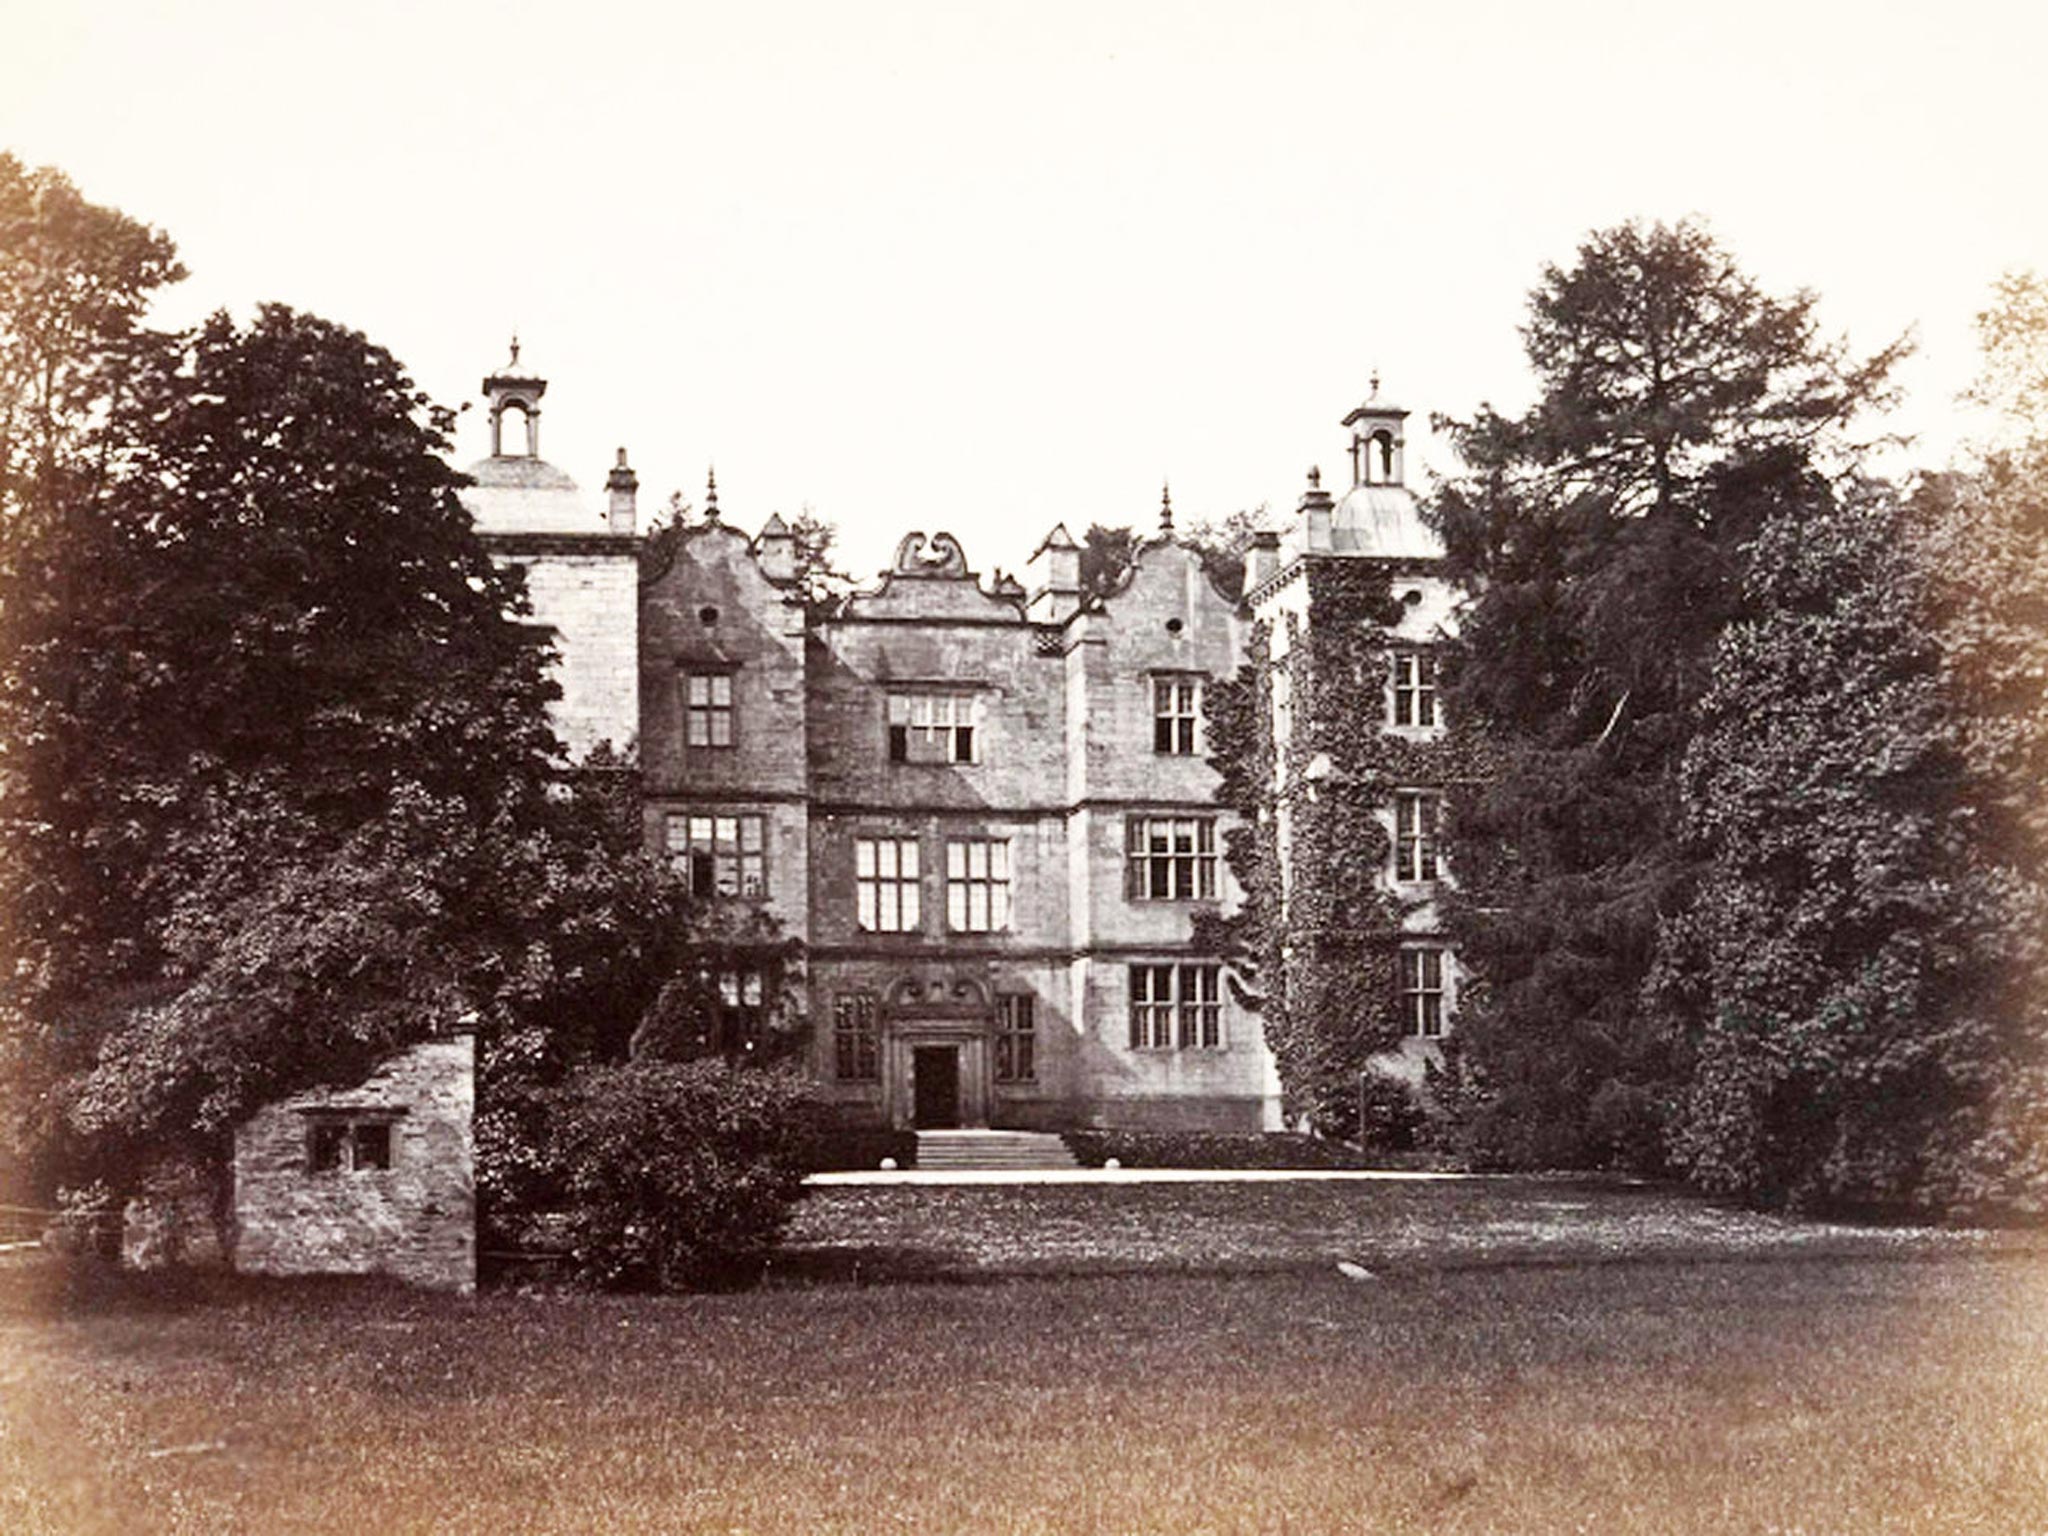 Plas Teg, a Jacobean house near the the village of Pontblyddyn, Flintshire between Wrexham and Mold, is said to be one of Wales' most haunted buildings. One of its late owners was the infamous 'hanging' Judge Jeffries, who is thought to have held court in